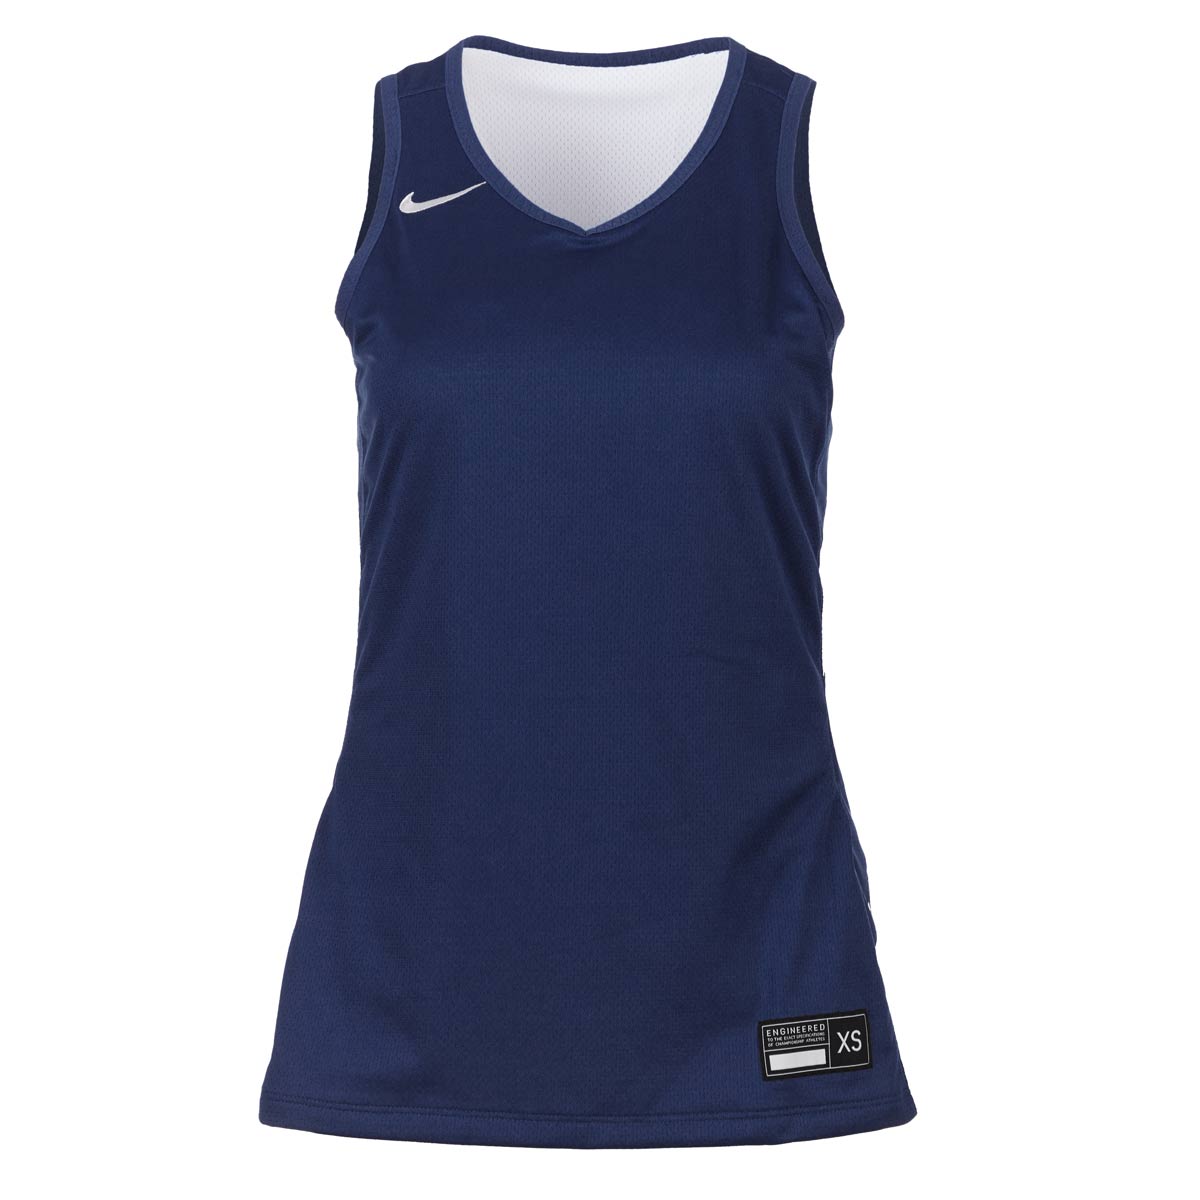 Nike Mens Team Dri-Fit Reversible Practice Jersey - Mens Navy/White Size S